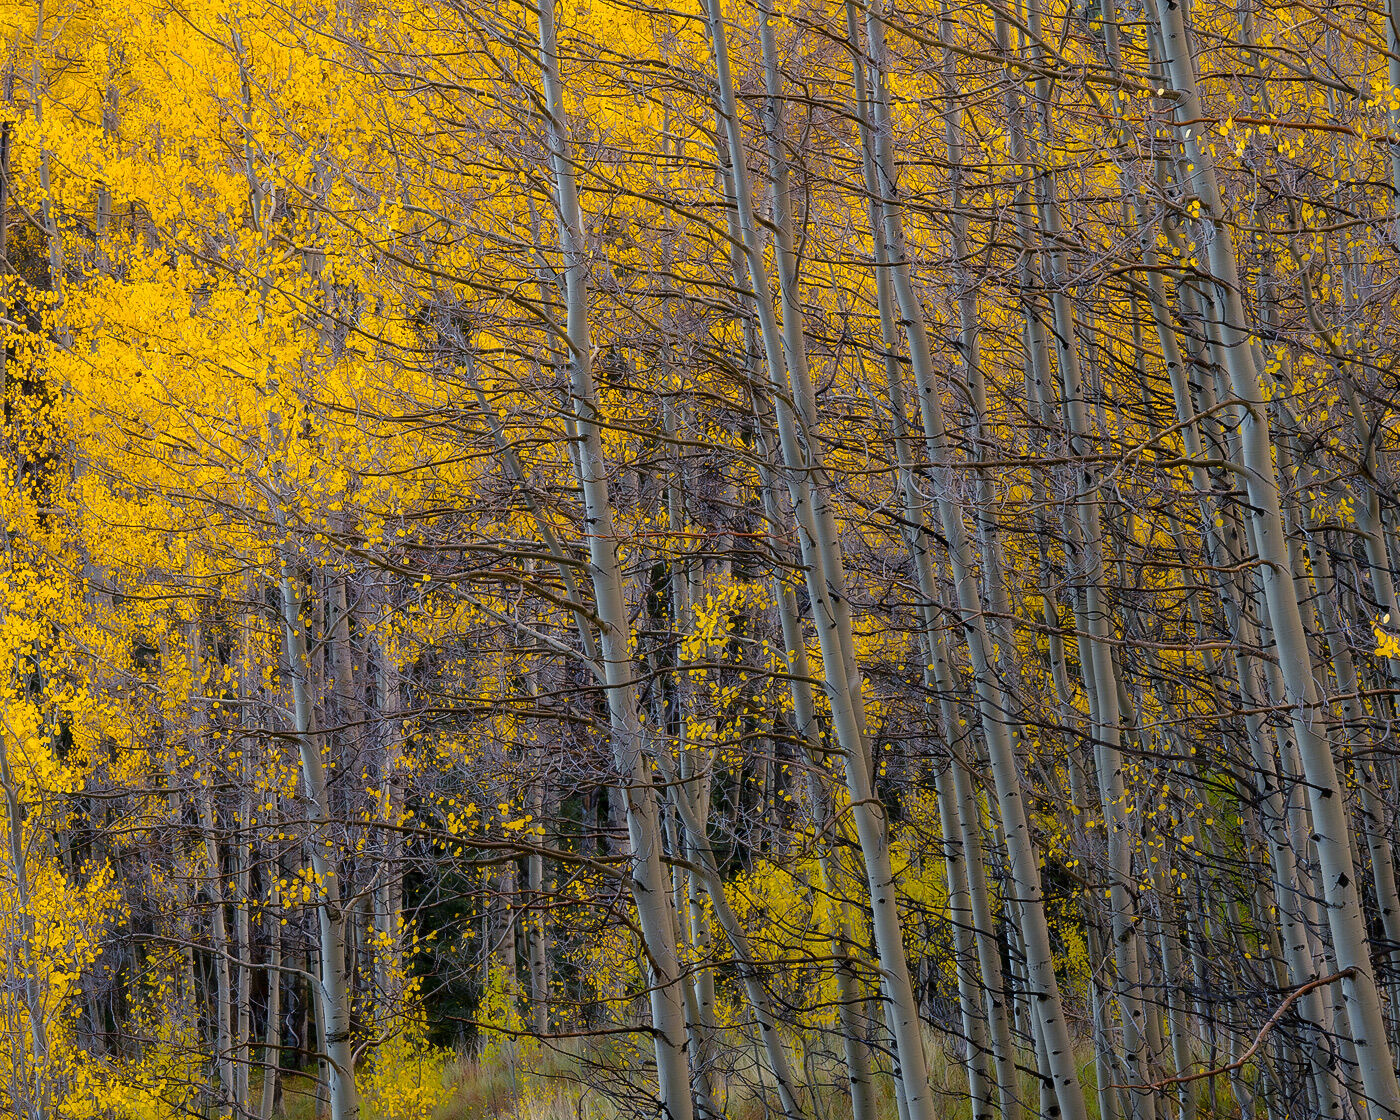 A grove of aspen trees grow at a slant with white trunks and yellow leaves on the aspen trees creating a vibrant background.